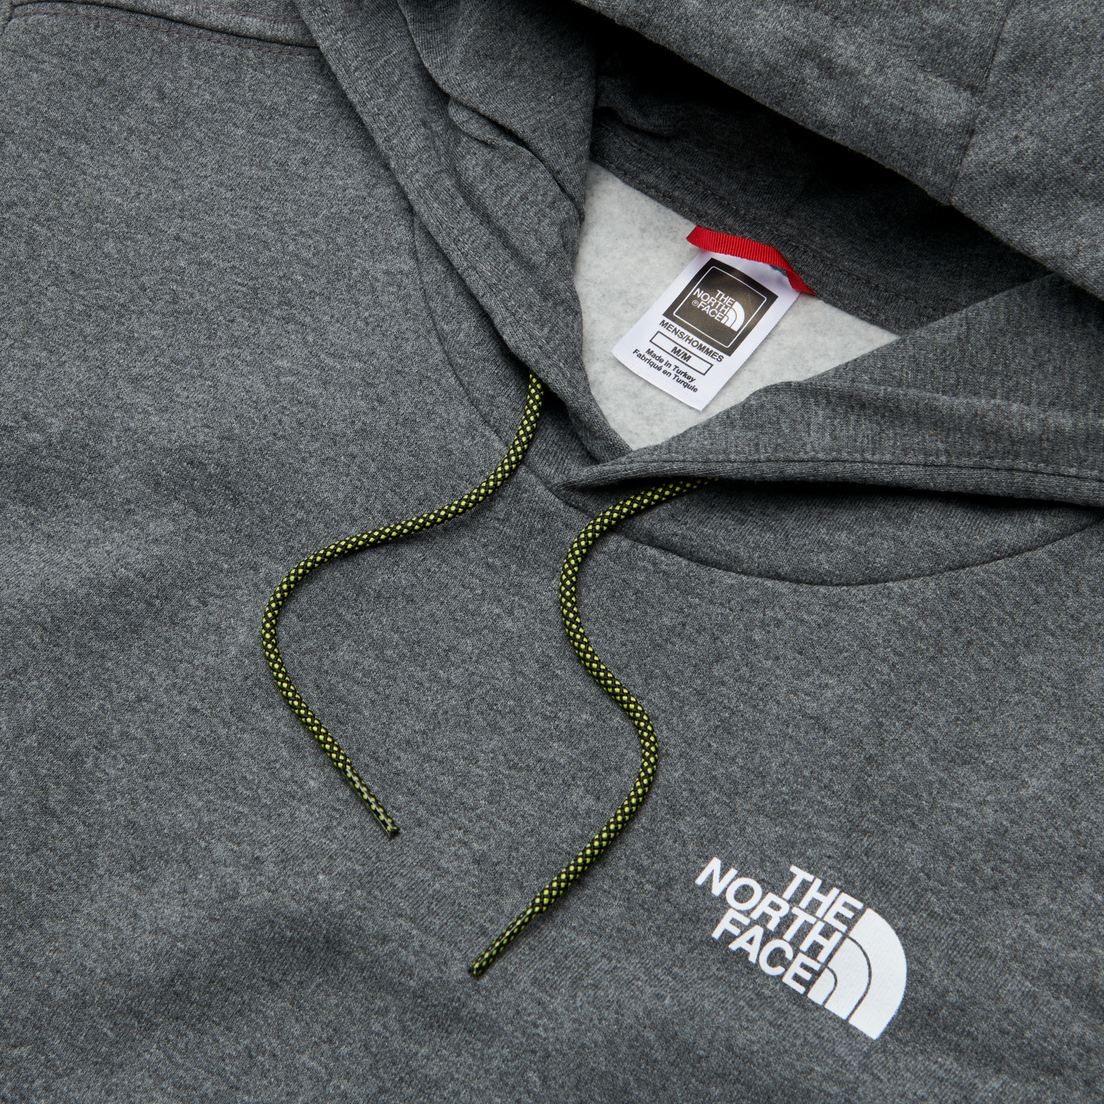 The North Face Мужская толстовка Black Box Search And Rescue Hoodie